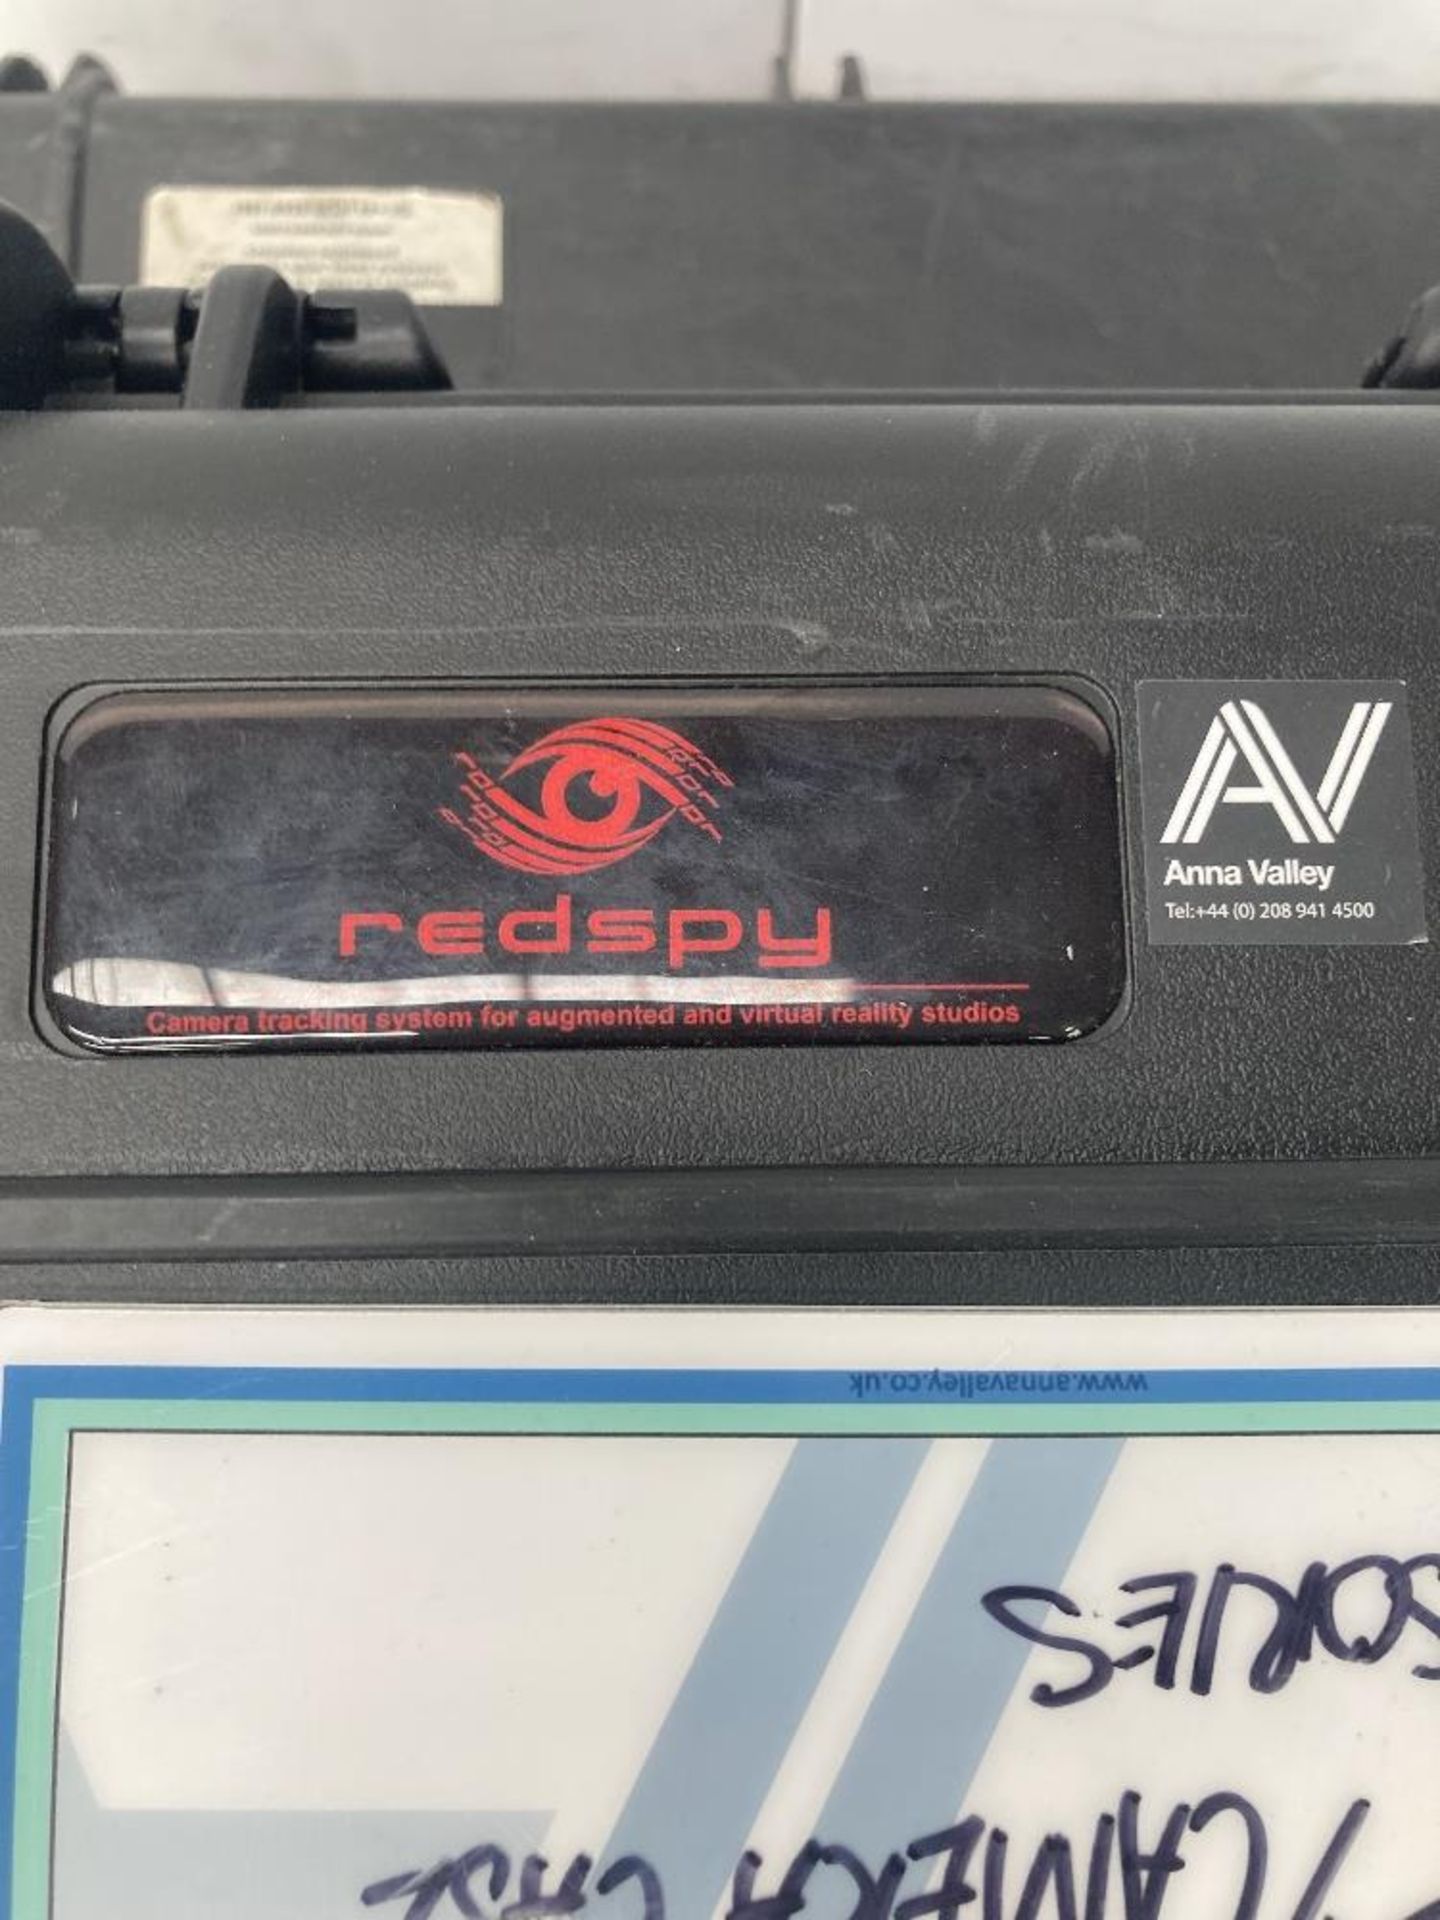 Redspy Camera Tracking System for Augmented and Virtual Reality Studios - Image 28 of 28